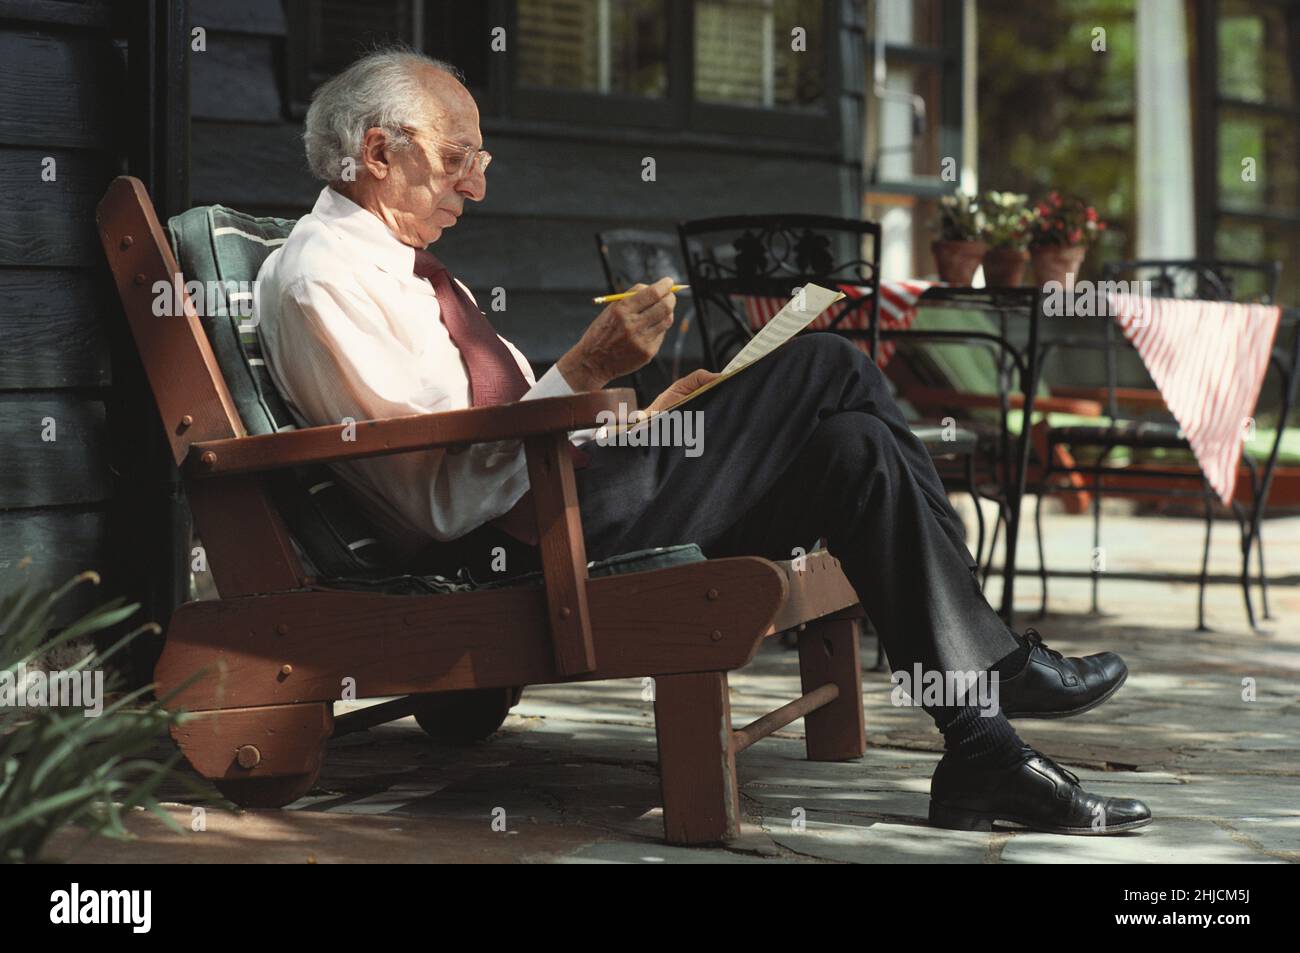 Aaron Copland (1900-1990), American composer, pianist, and conductor, at home working on music. Stock Photo